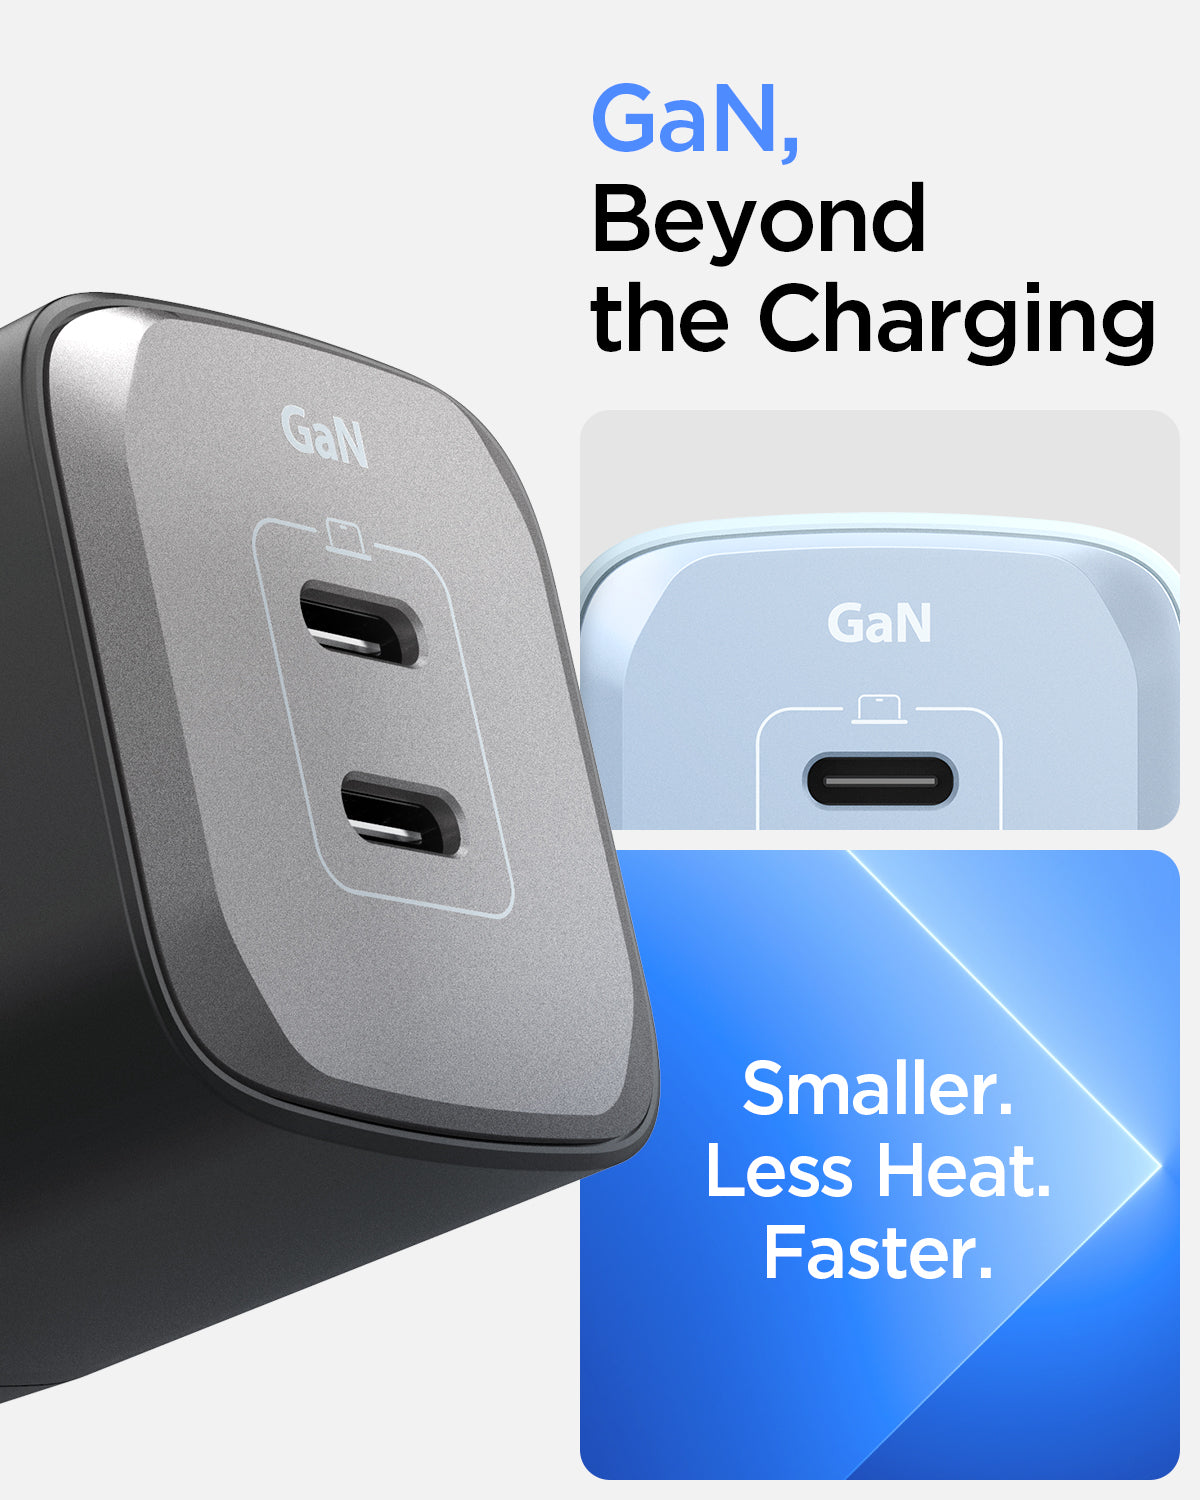 ACH05151 - ArcStation™ Pro GaN 452 Dual USB-C Wall Charger PE2203 in Midnight Black showing the GaN, Beyond the Charging. Smaller, Less Heat and Faster. Both shown charger are in usb c type